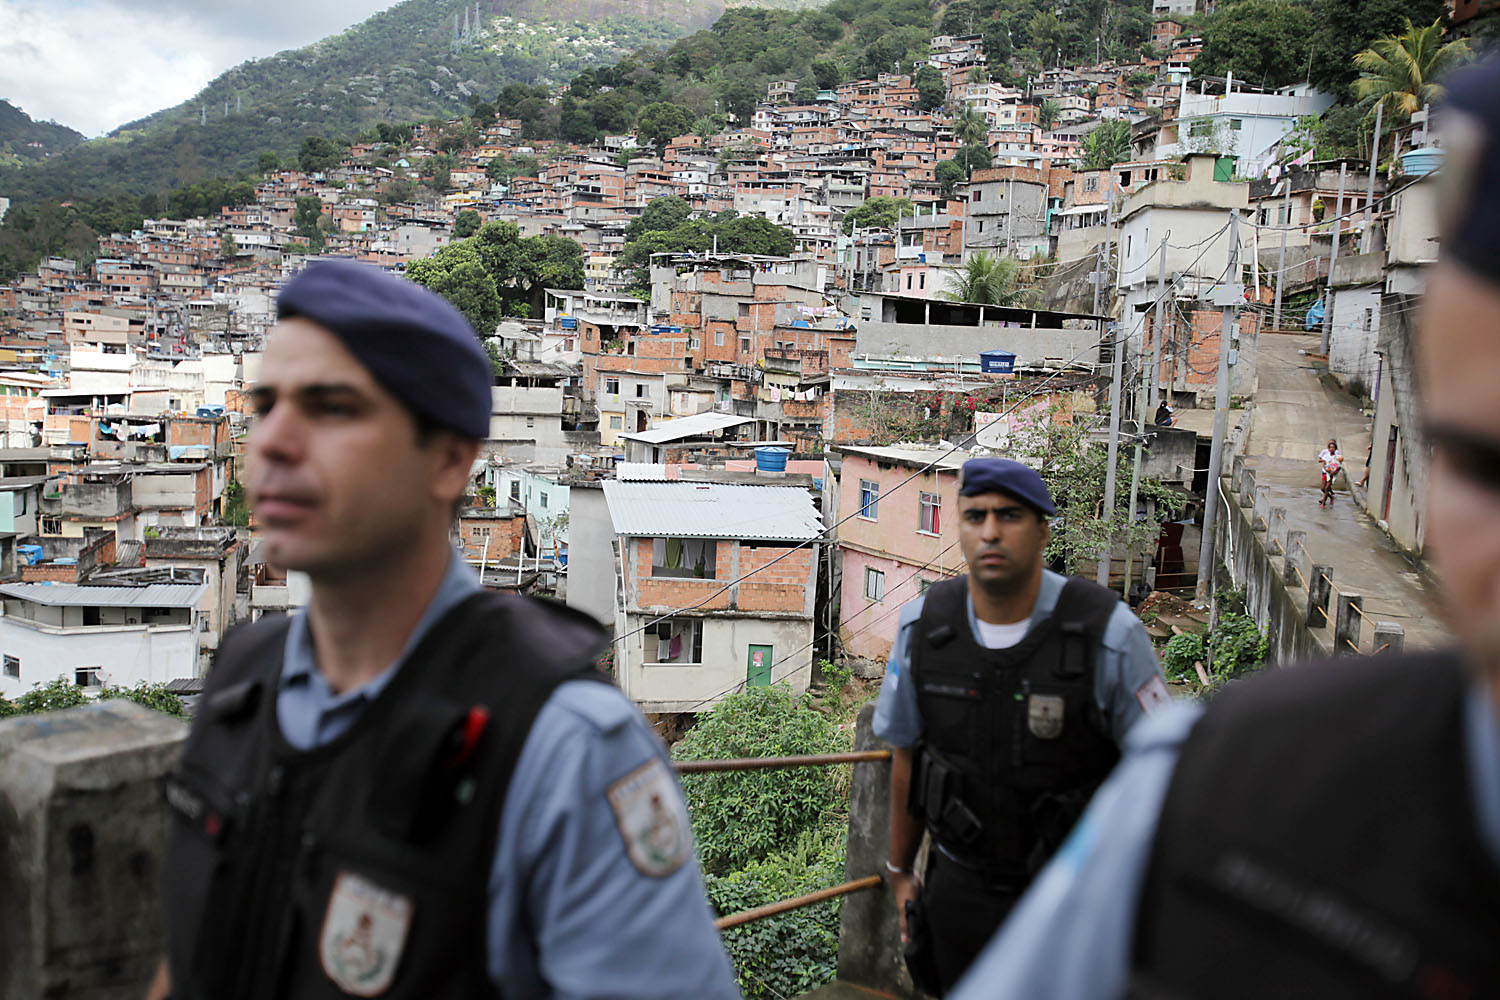 In a scene that would have been unthinkable a few years ago, police patrol the Borel favela of Rio de Janeiro.